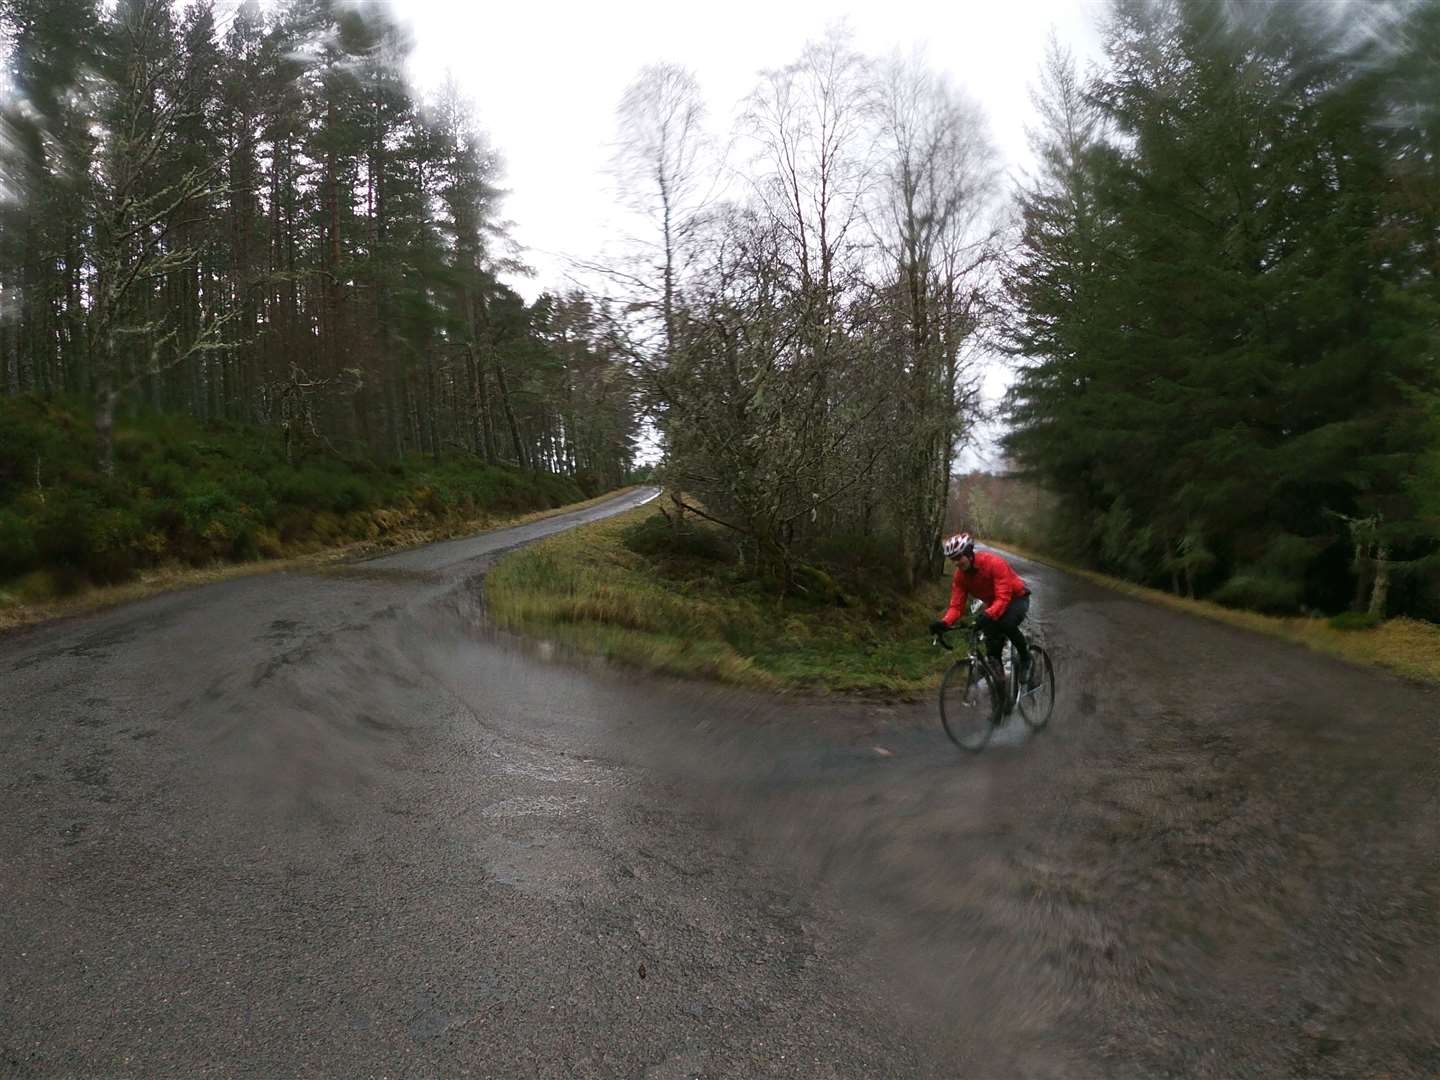 A cyclist negotiates the wet conditions on a hairpin bend near the top of McBain.